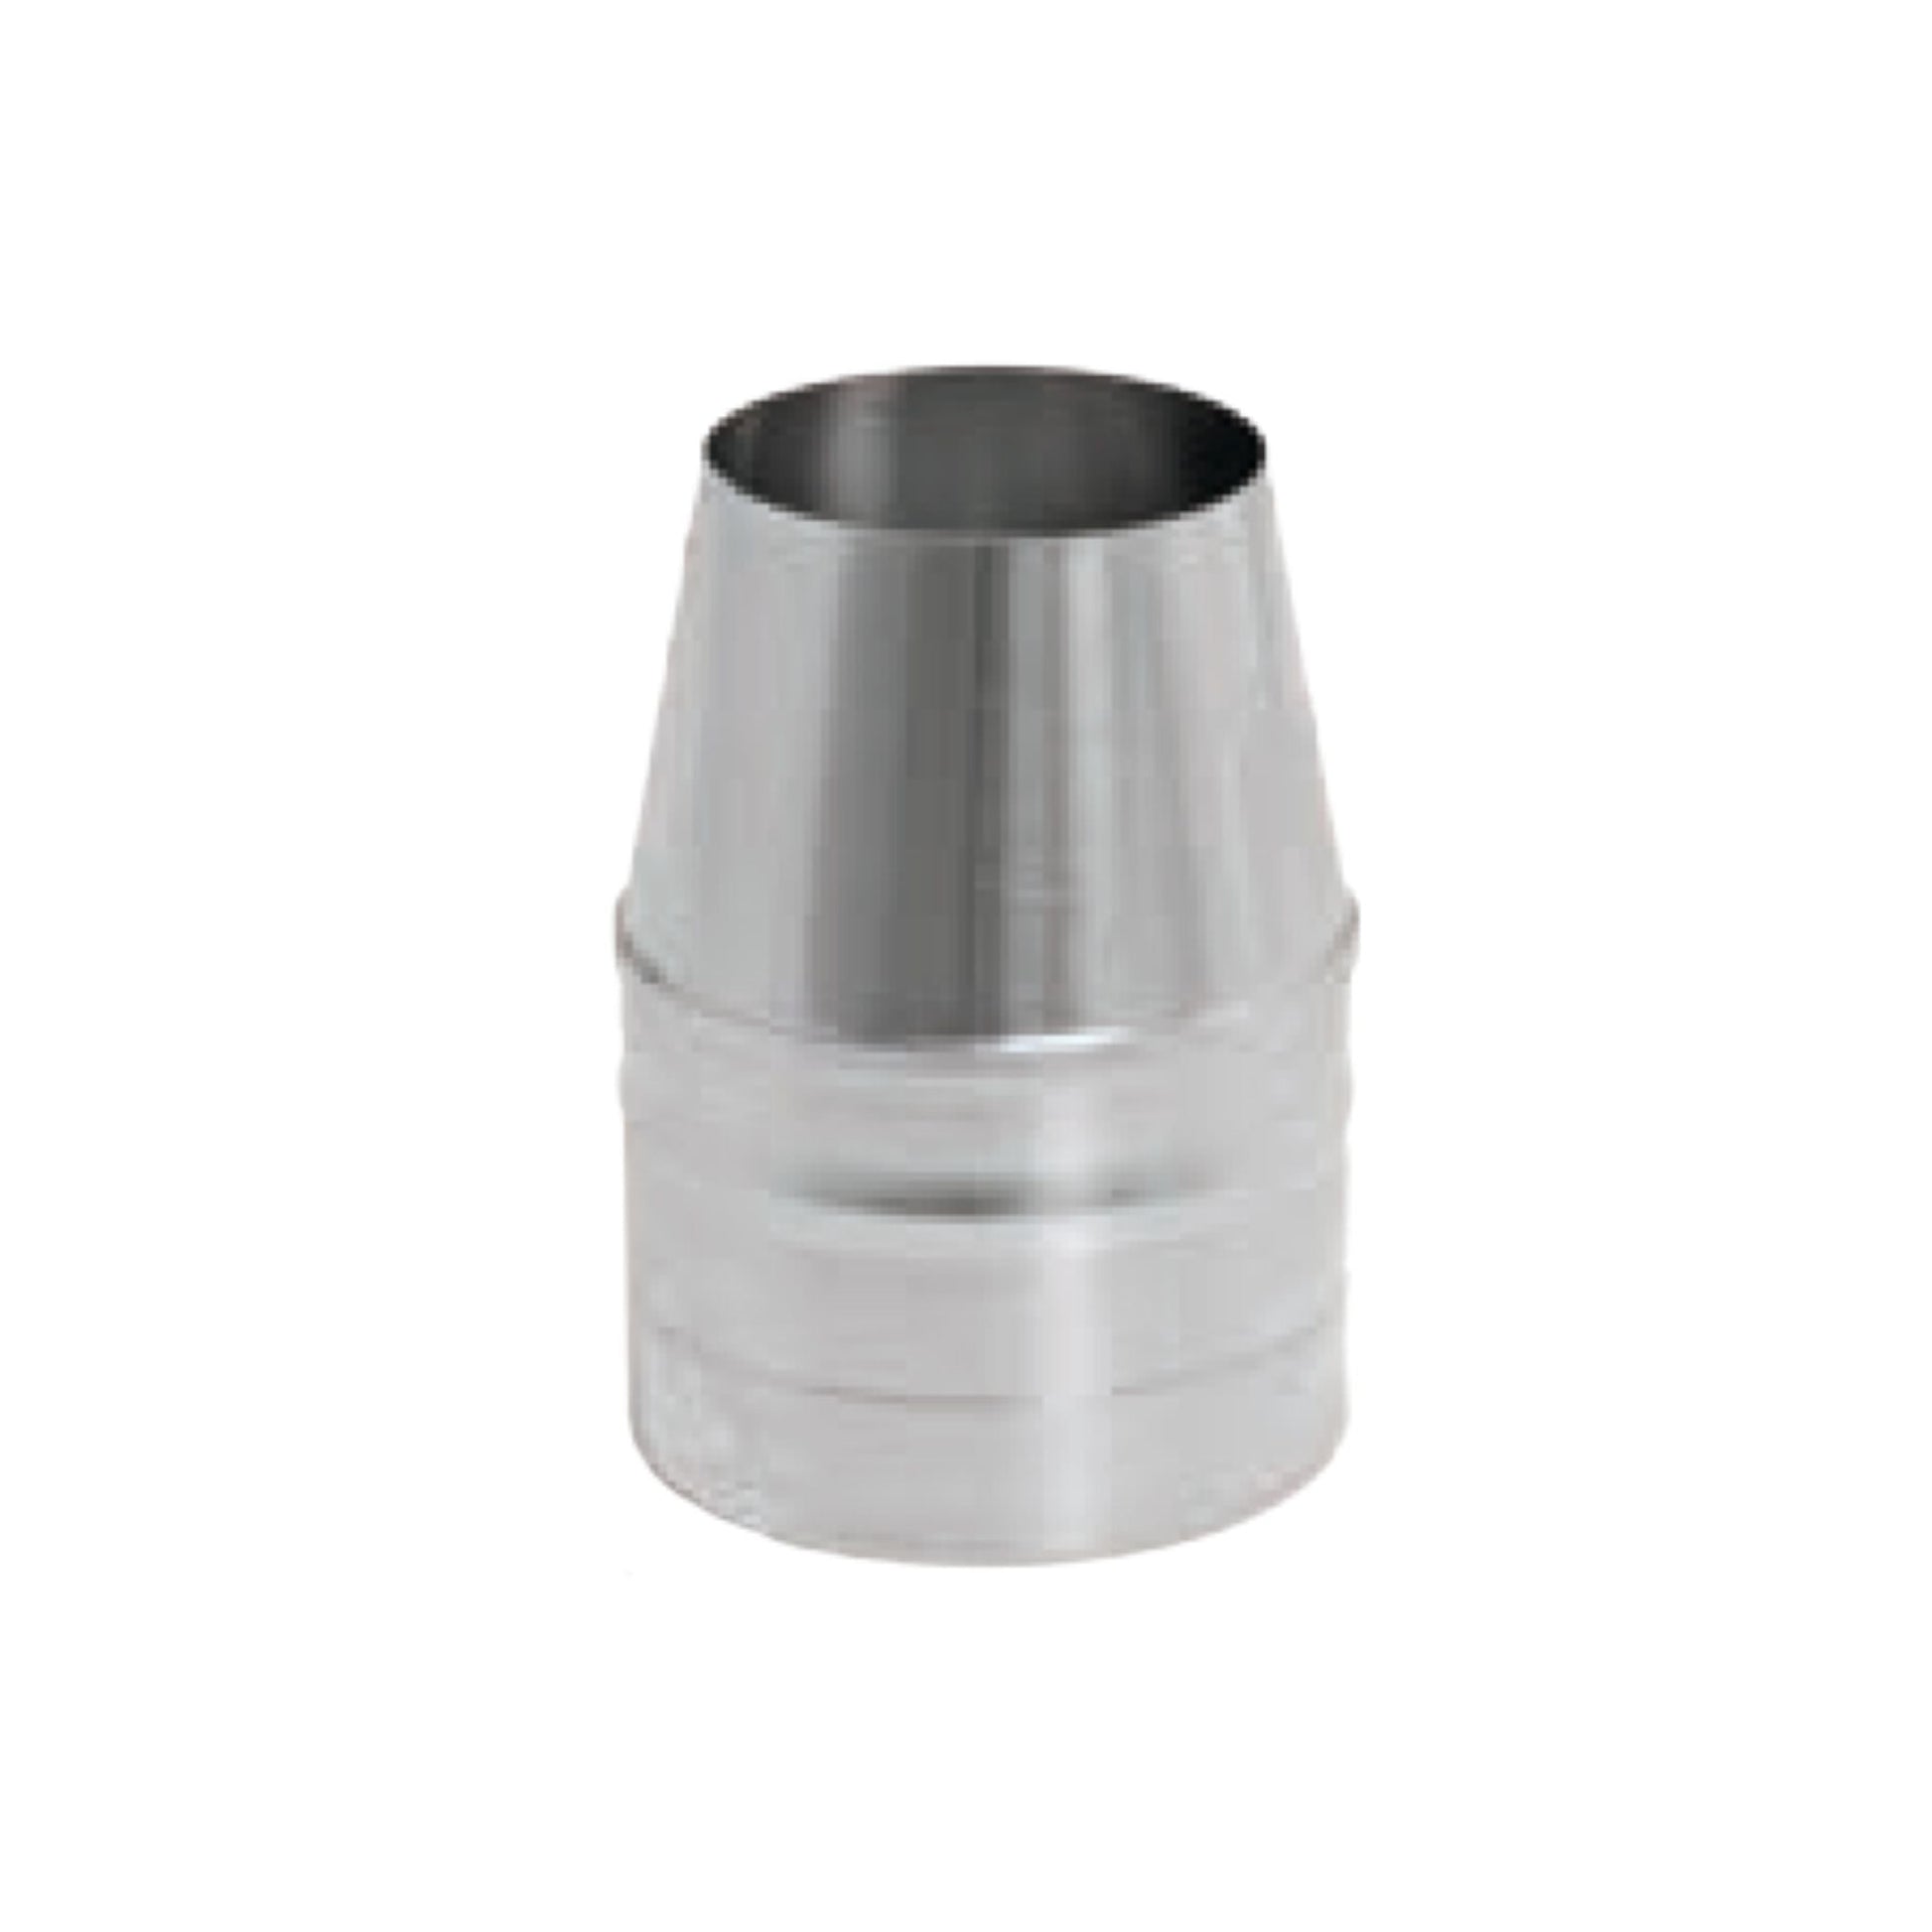 DuraVent FasNSeal 4" x 3" 29-4C Stainless Steel Termination Cone